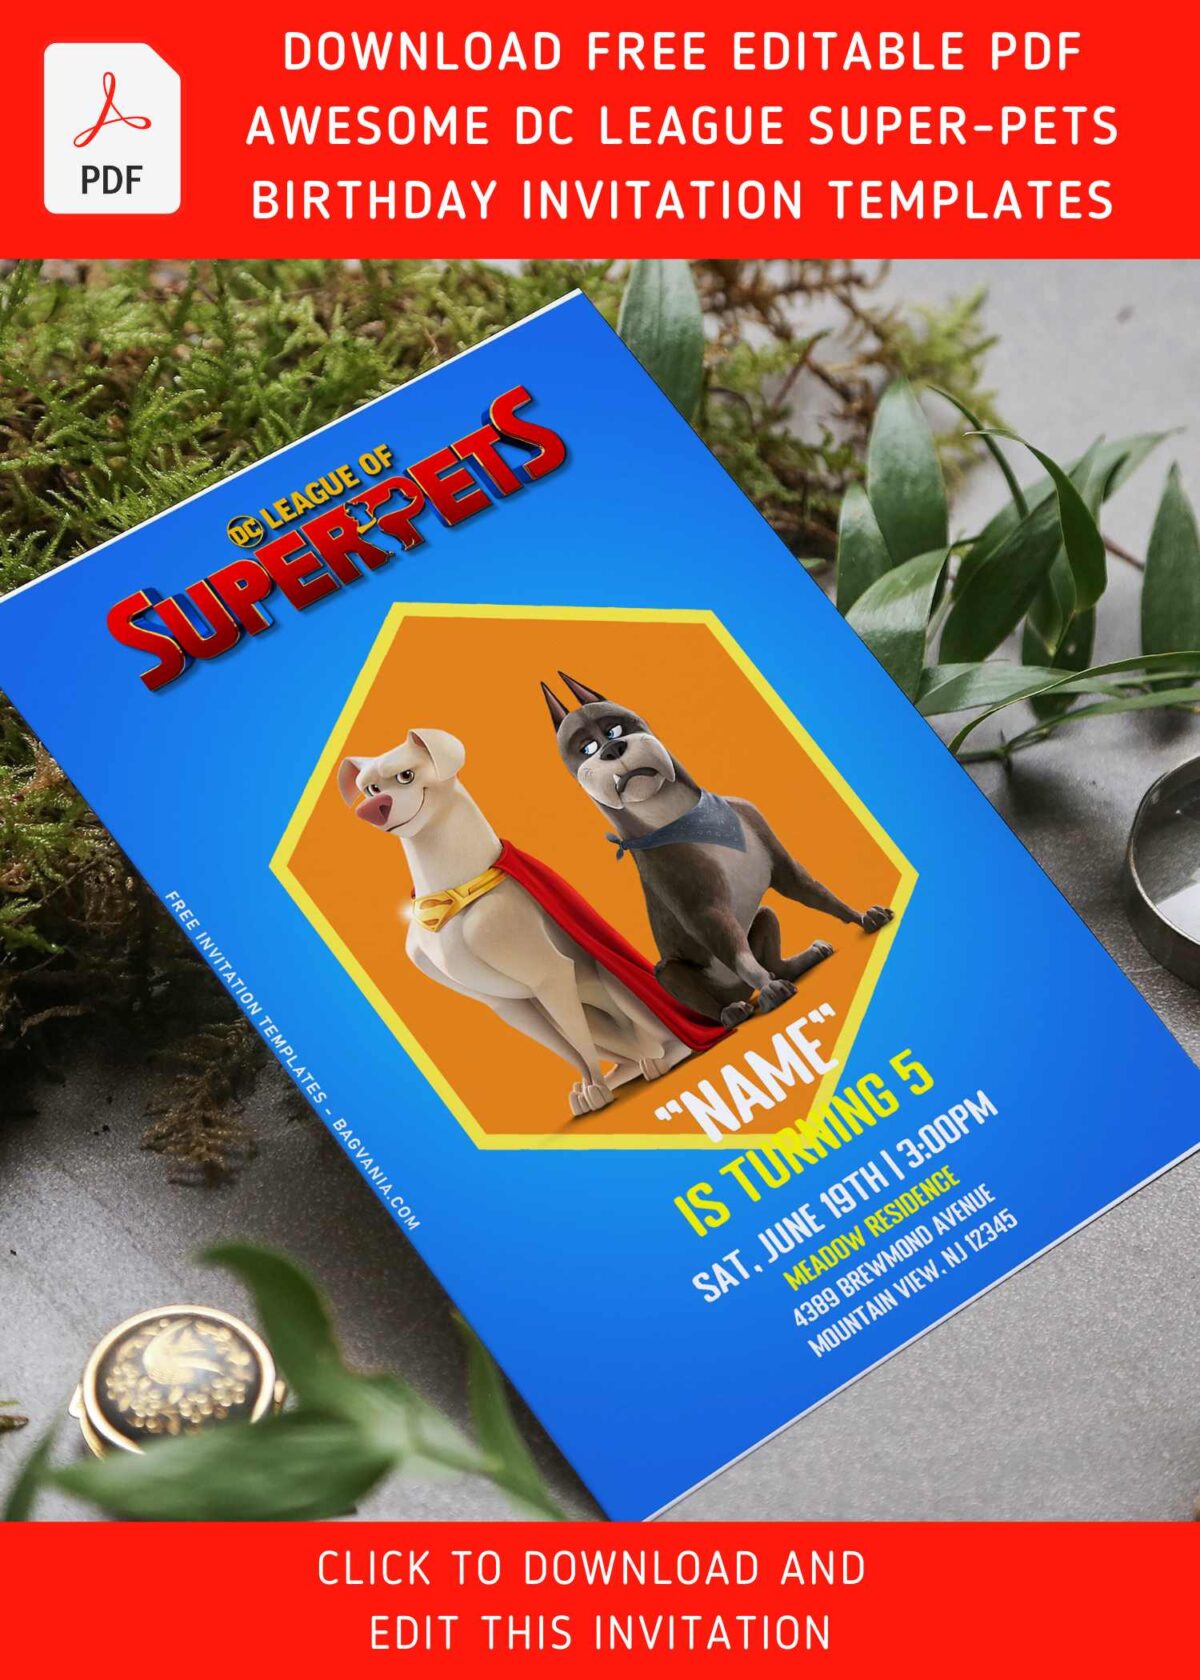 (Free Editable PDF) Awesome And Cute DC League Super Pets Birthday Invitation Templates with cute hexagon shaped text box